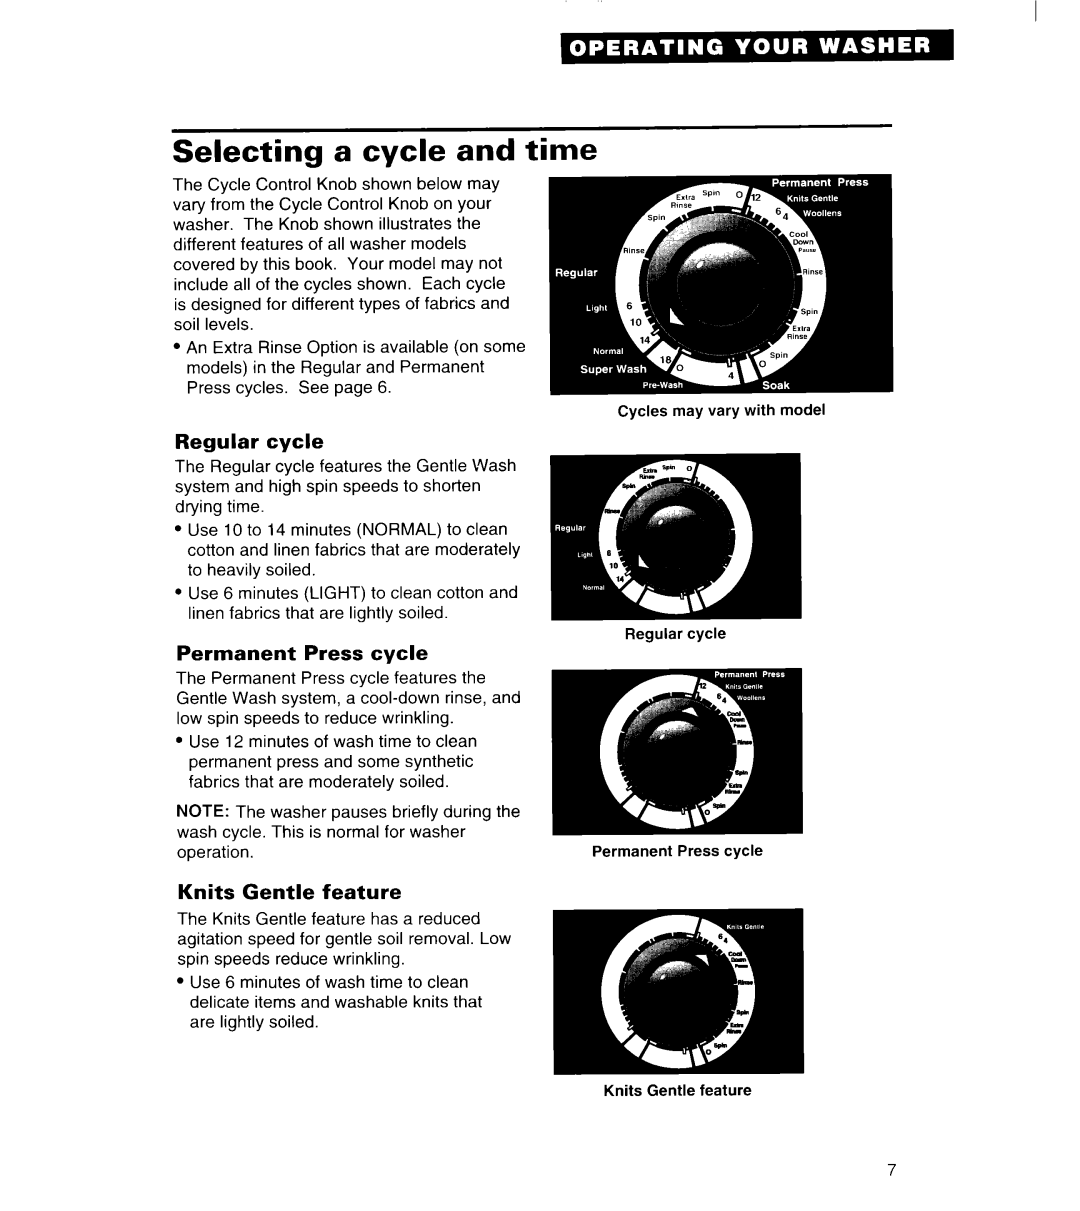 Whirlpool 3363834 warranty Selecting a cycle and time, Regular cycle, Permanent, Press cycle, Knits Gentle feature 